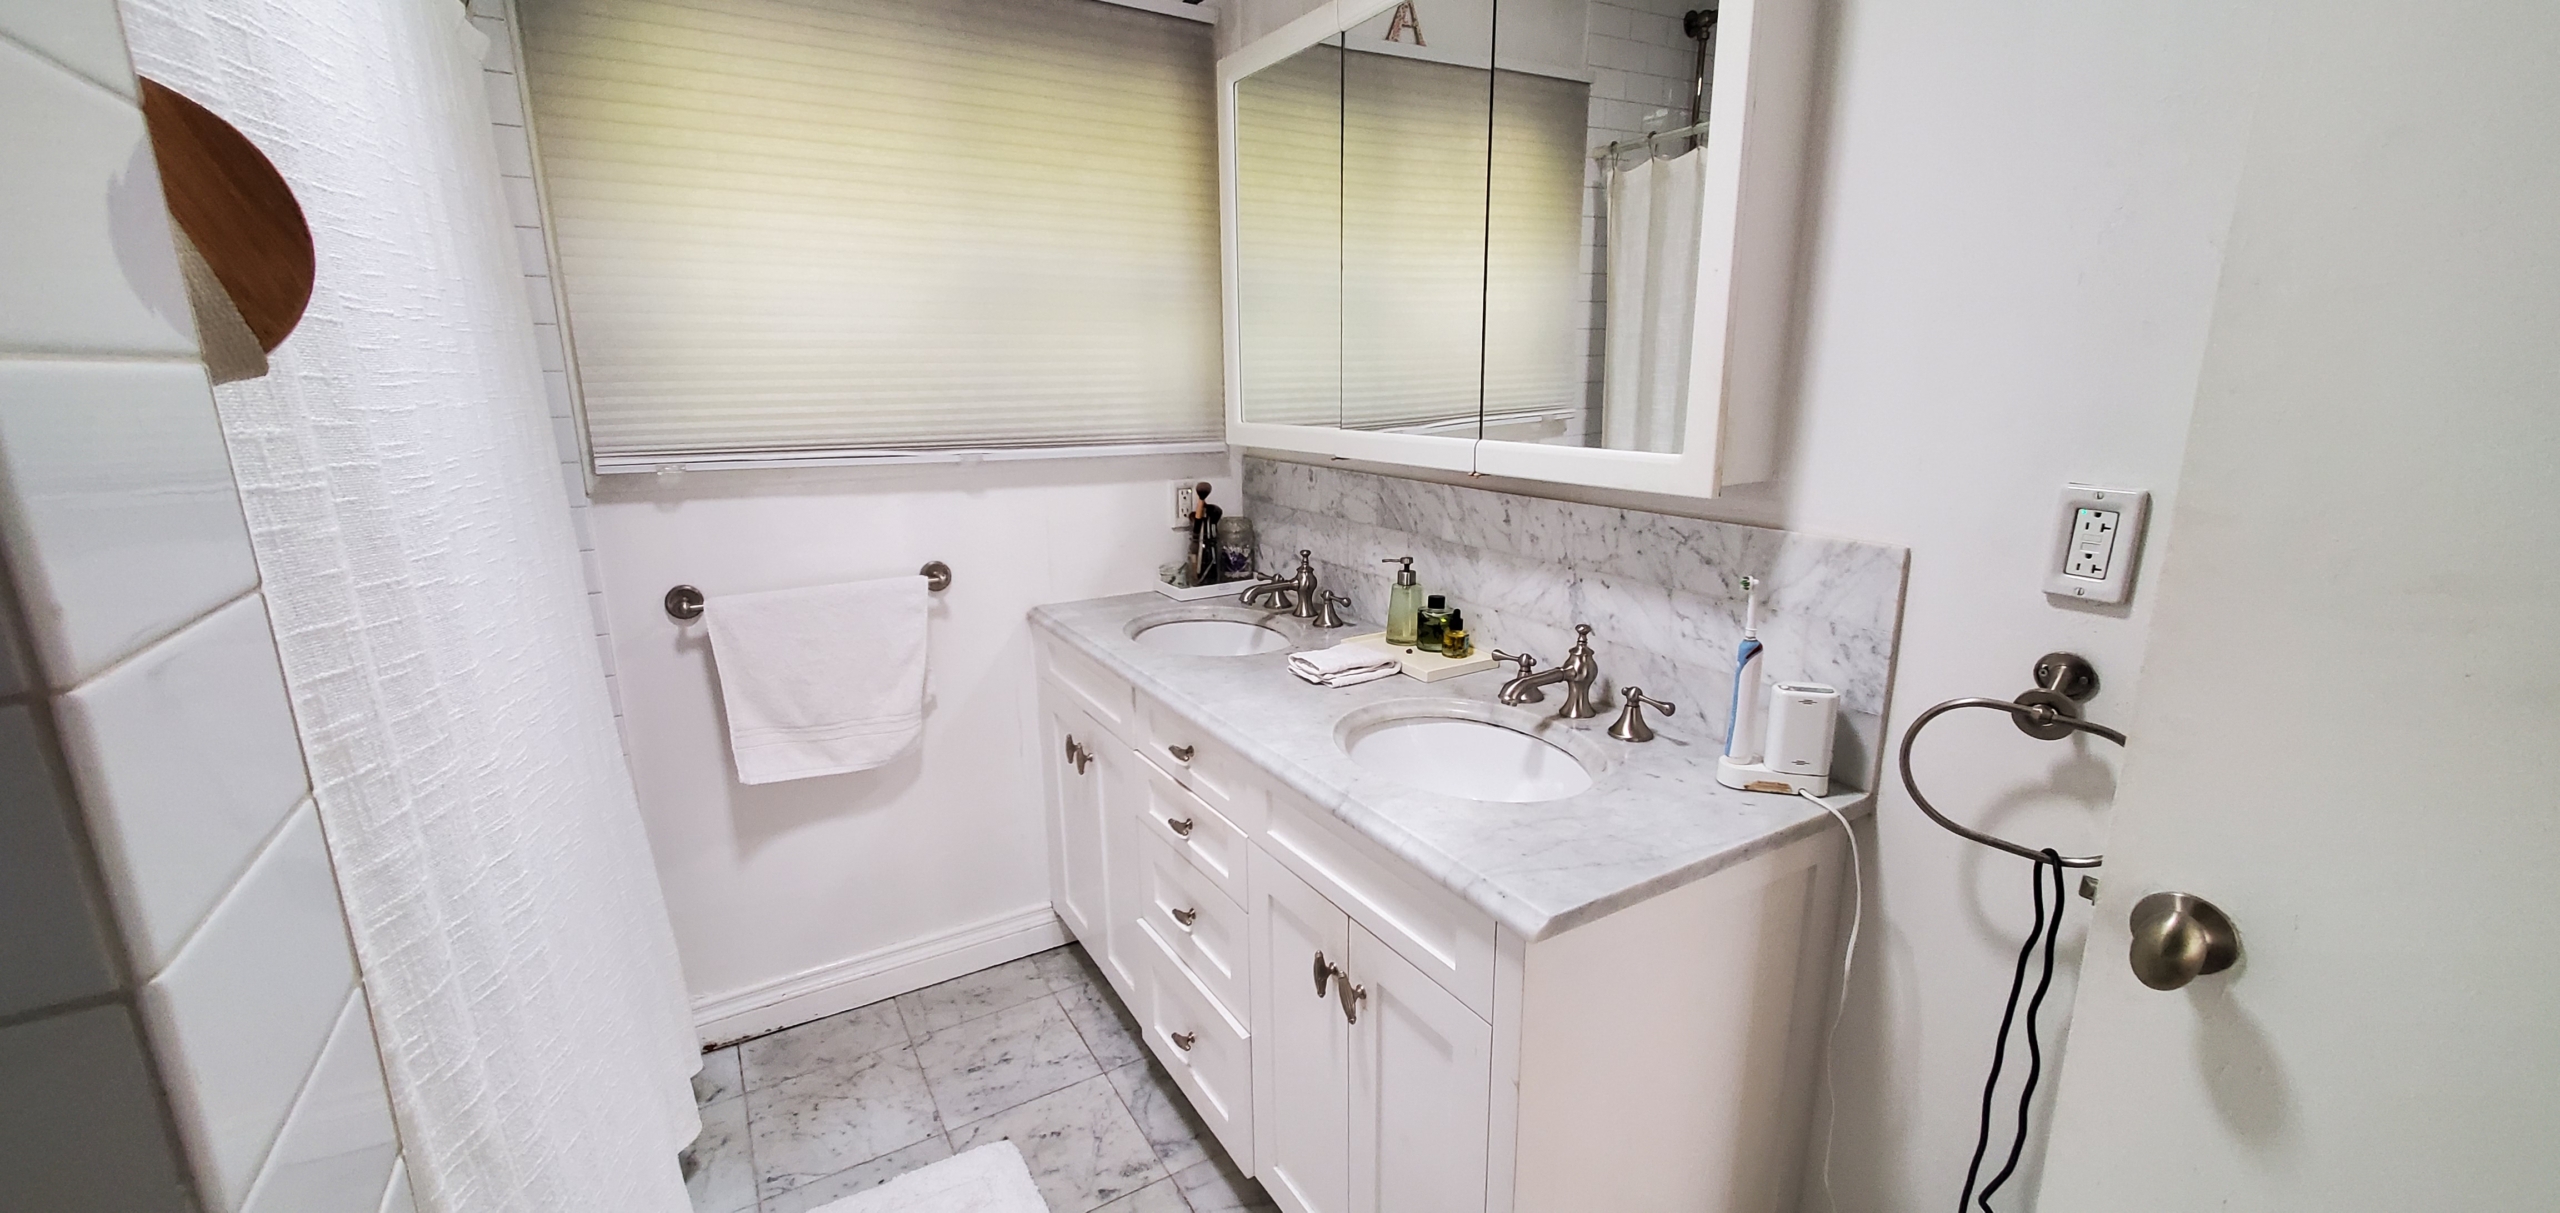 White bathroom with marble countertops. Vanity has two sinks and a large medicine cabinet above